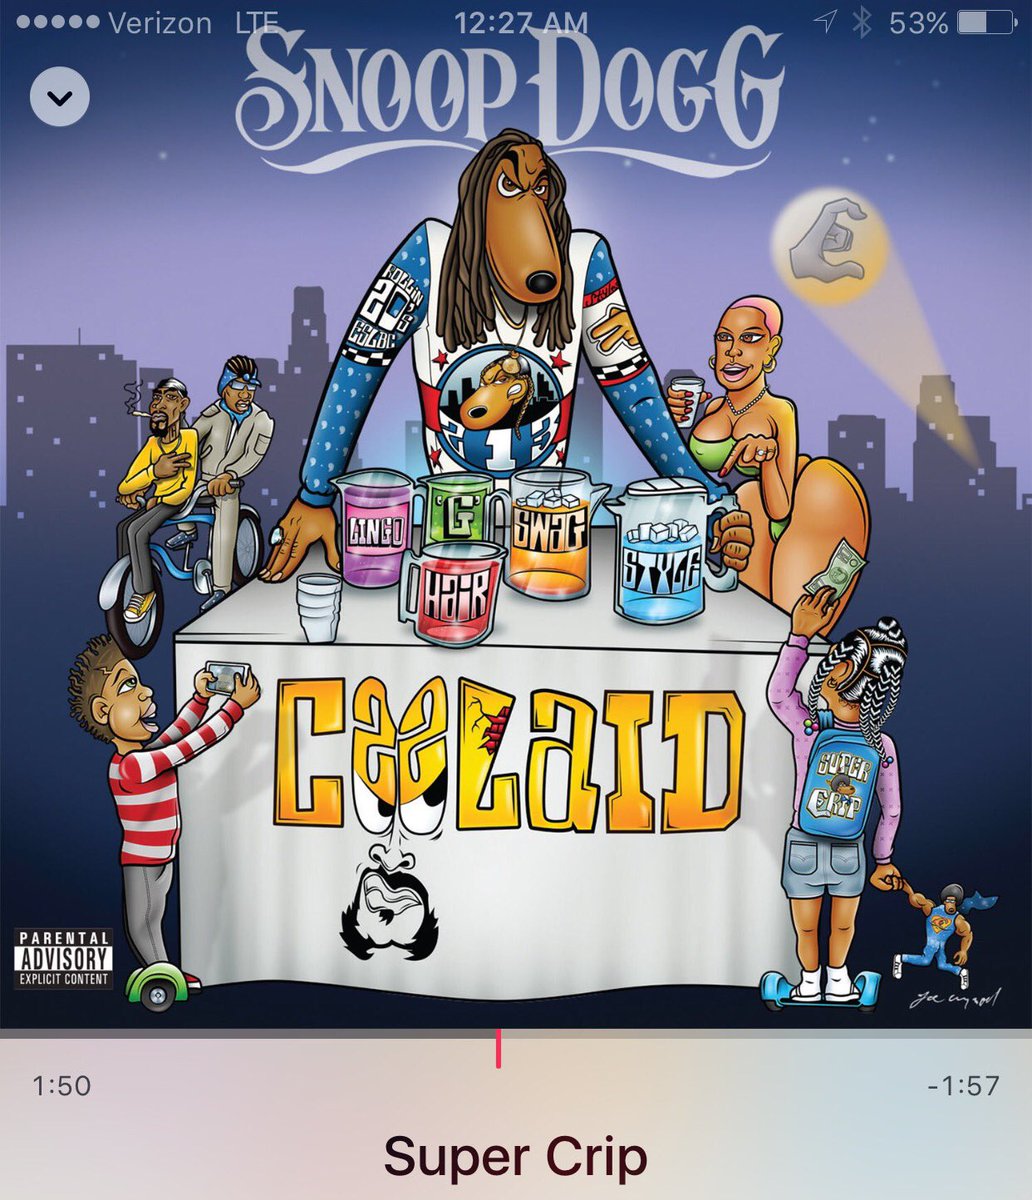 RT @KingDevo: Mannnnn my Unc @SnoopDogg #COOLAID is #Lit 
Go get that ASAP #YoureWelcome https://t.co/qfQFj2eInf